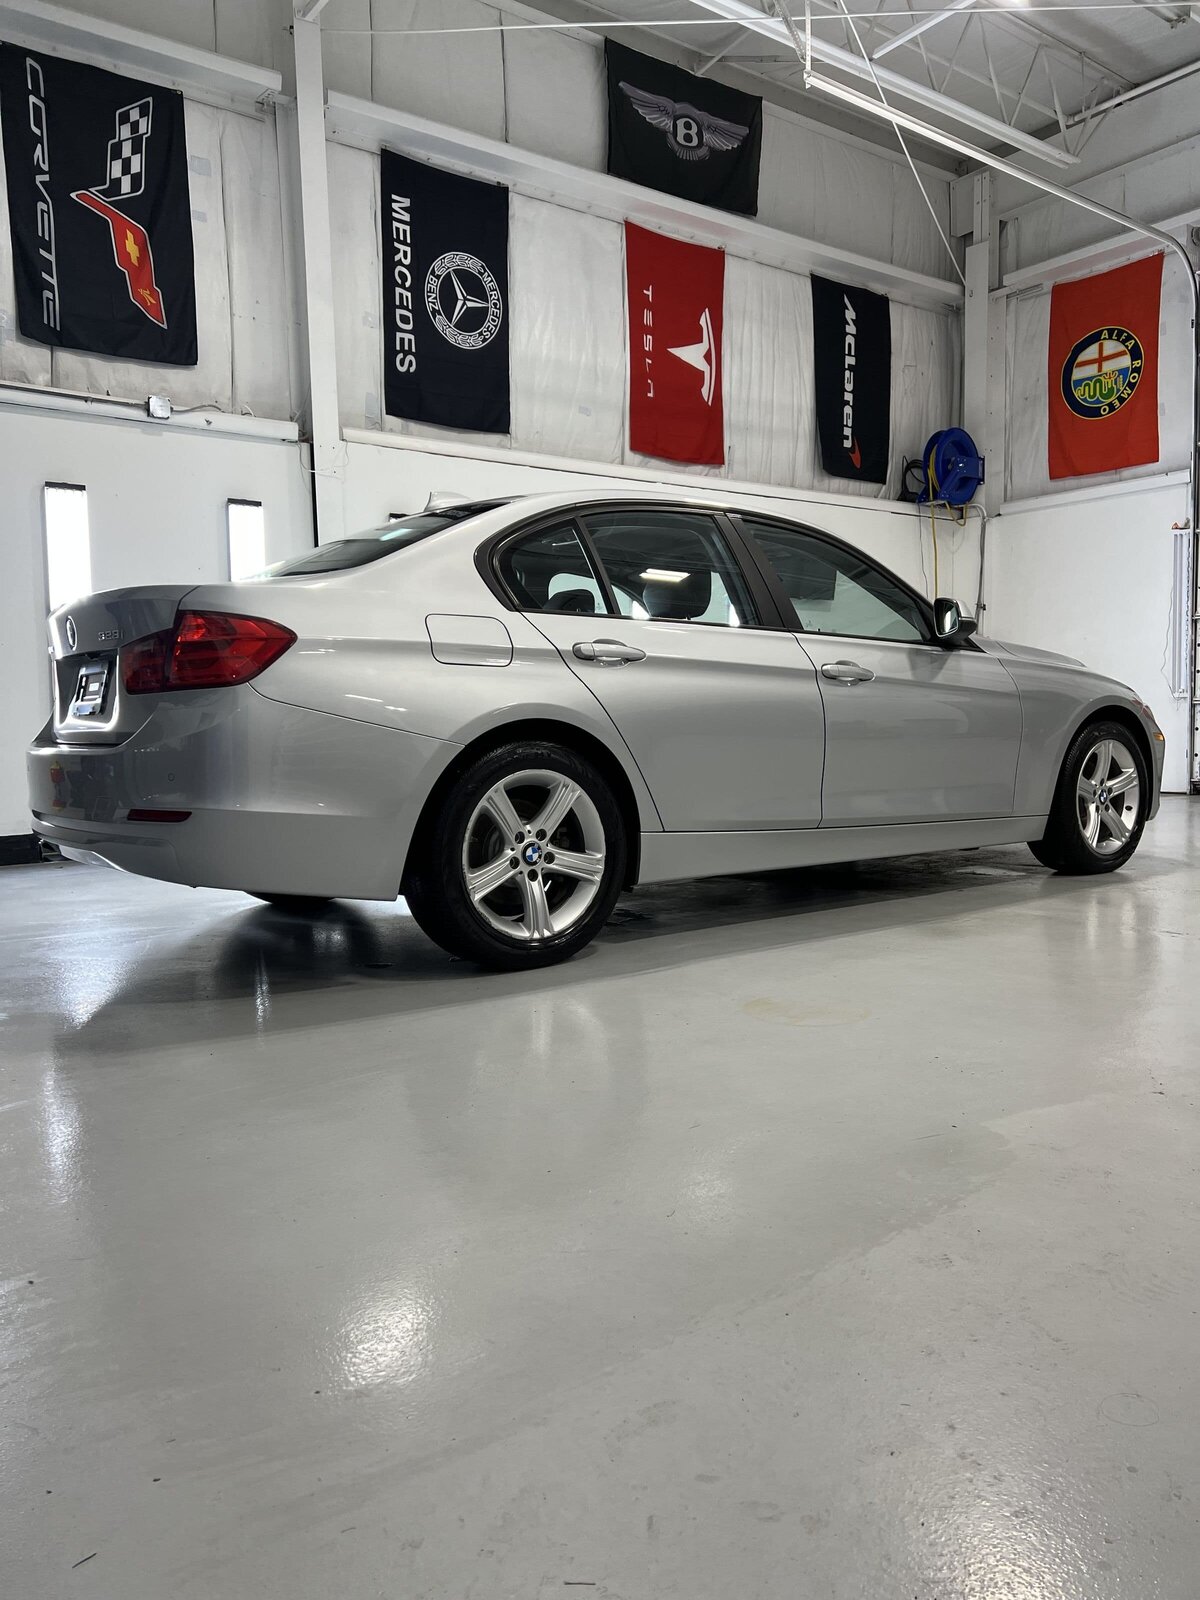 a-nice-touch-auto-detailing-paint-correction-silver-bmw-north-haven